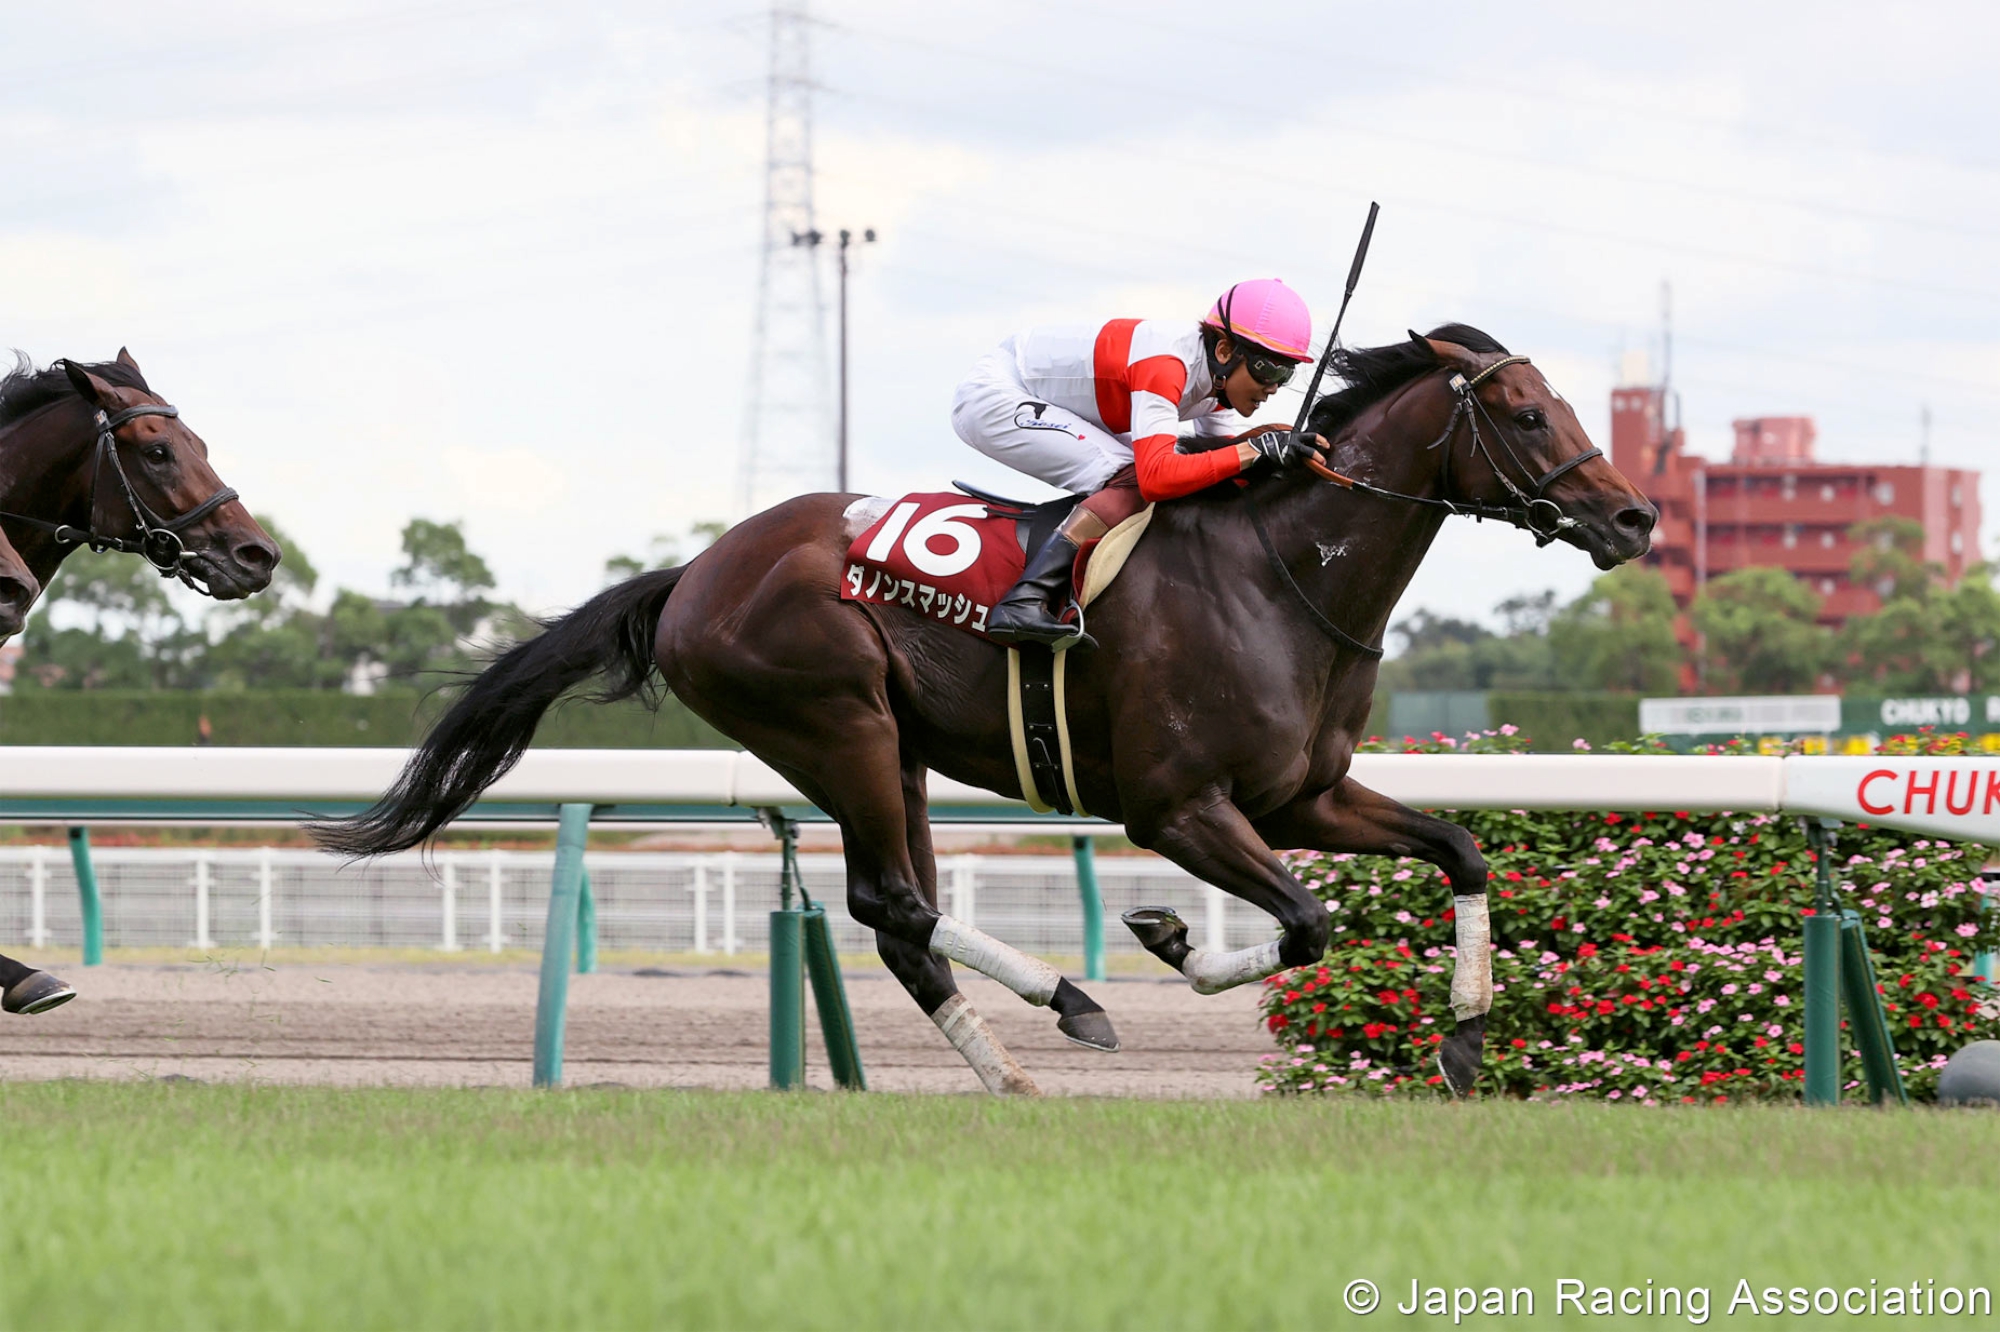 Danon Smash – JPN : Finished second to Gran Alegria last start in the G1 Sprinters Stakes; dual G2 winner and four-time G3 winner prior to that.